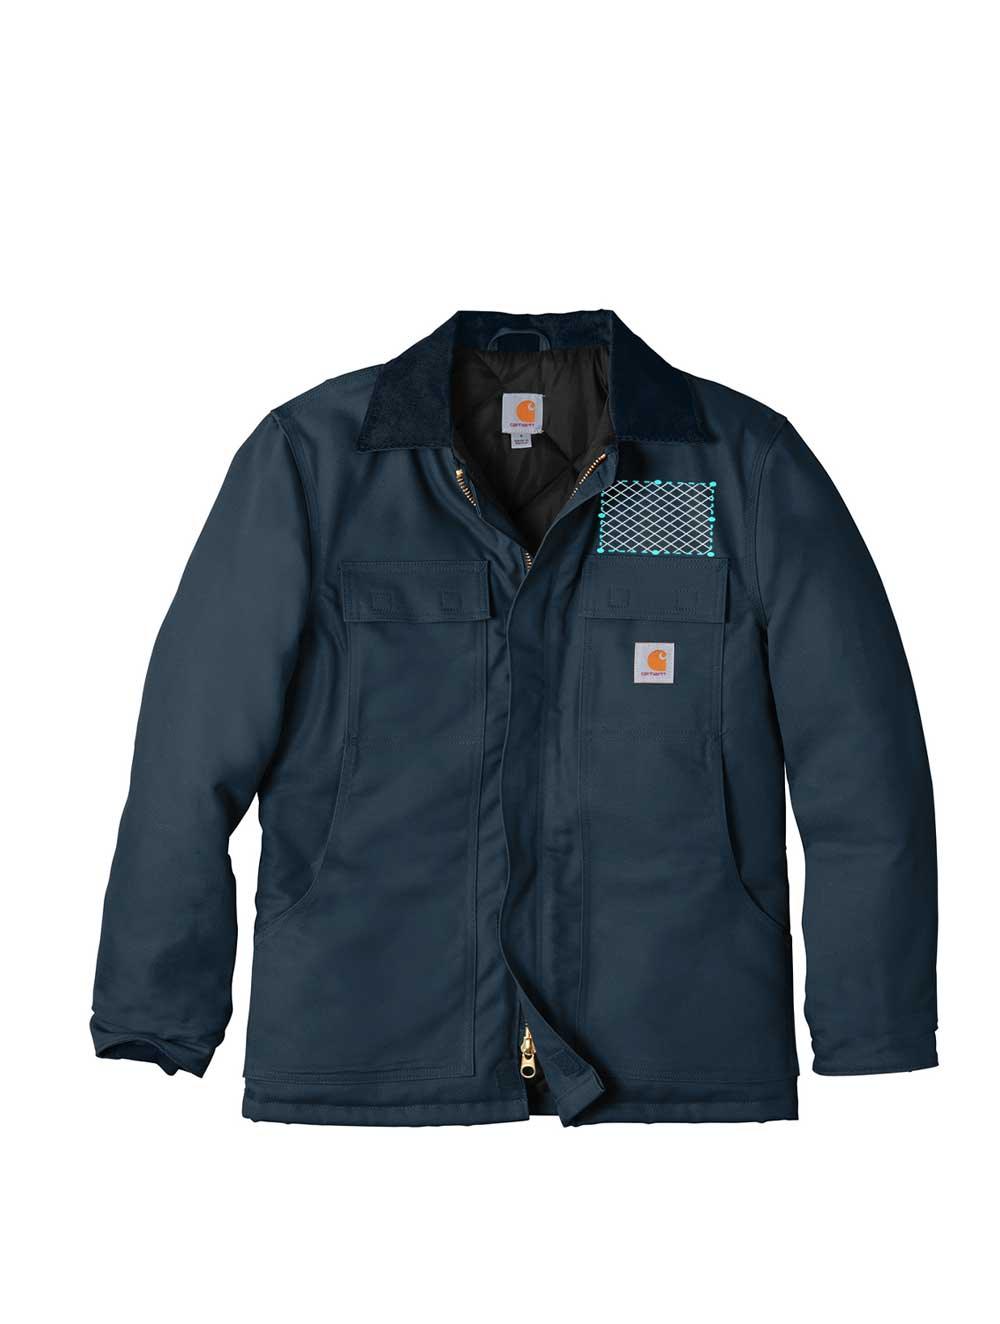 Embroidered Carhartt ® Duck Traditional Coat - Constantly Create Shop